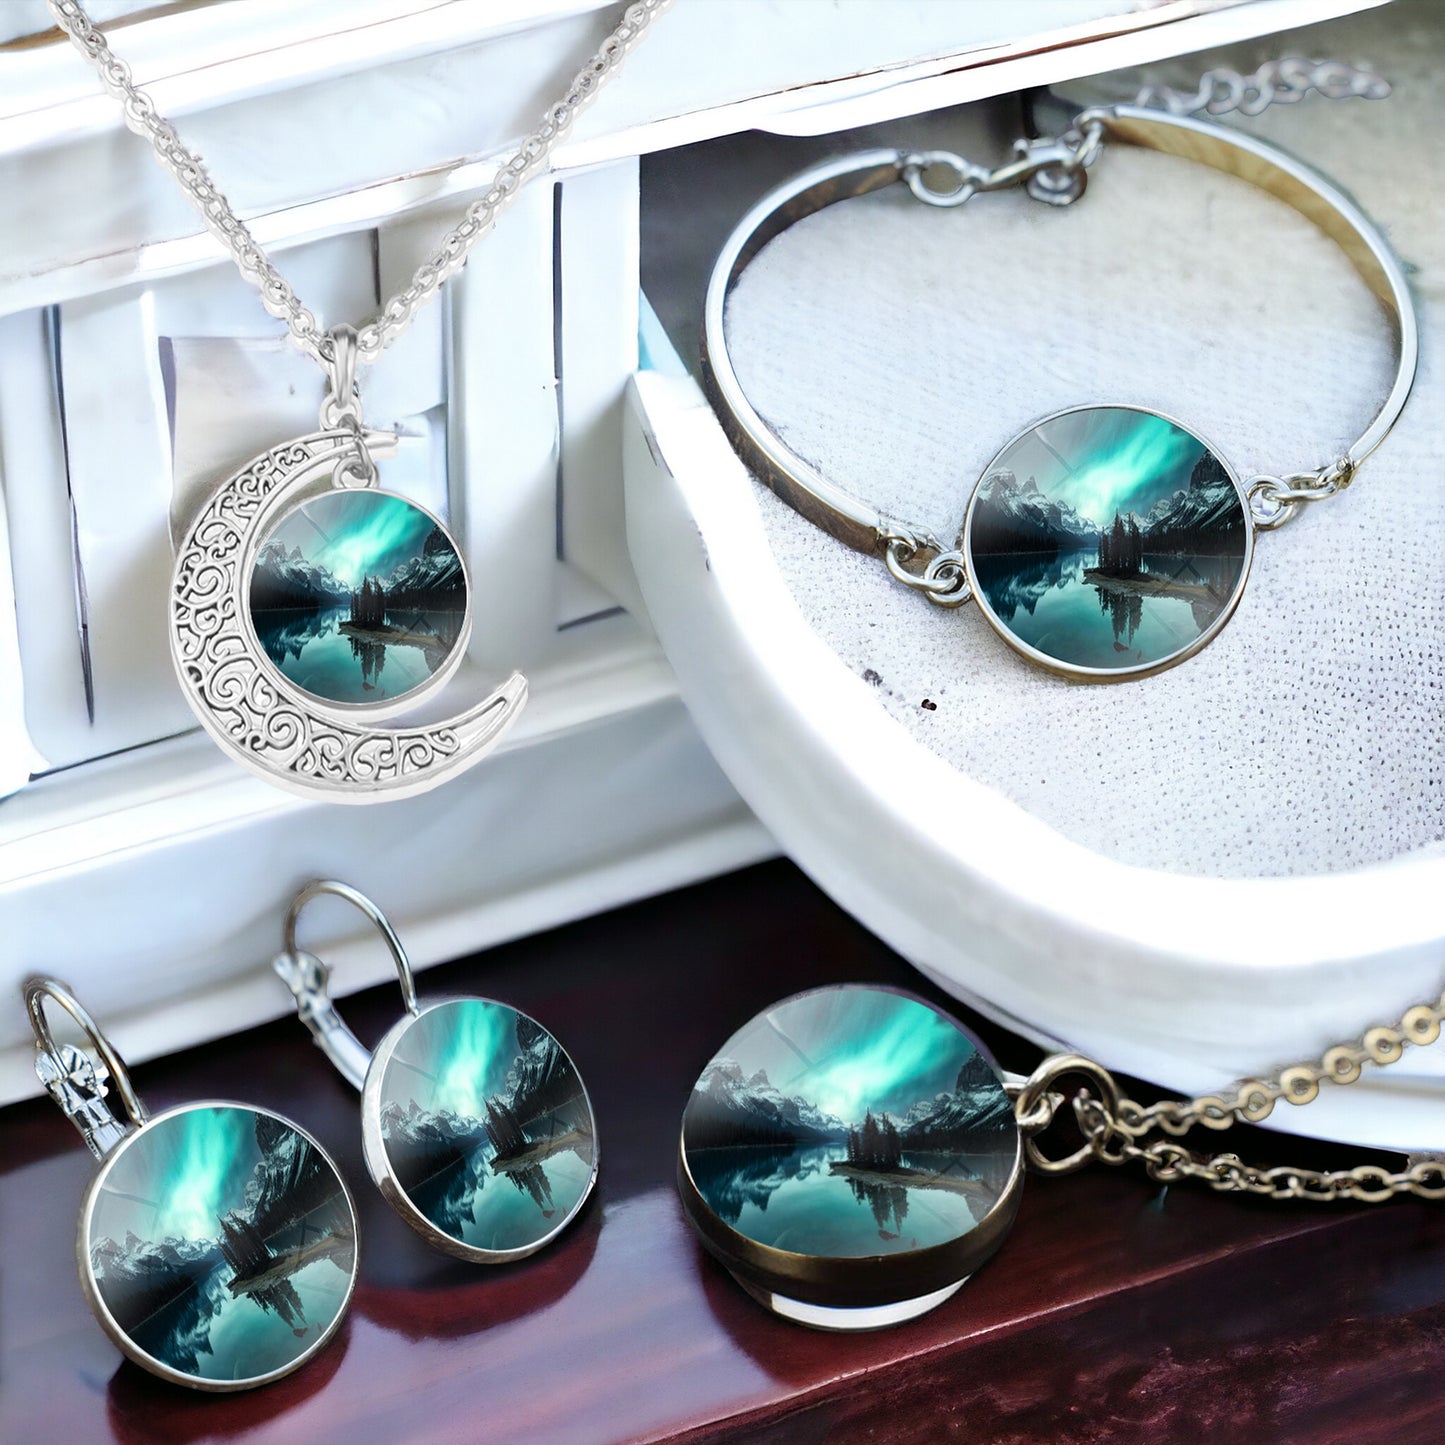 4-Piece Jewelry Set with Glass Ball Necklace, Crescent Necklace, Bracelet, and Glass Cabochon Drop Earrings 1